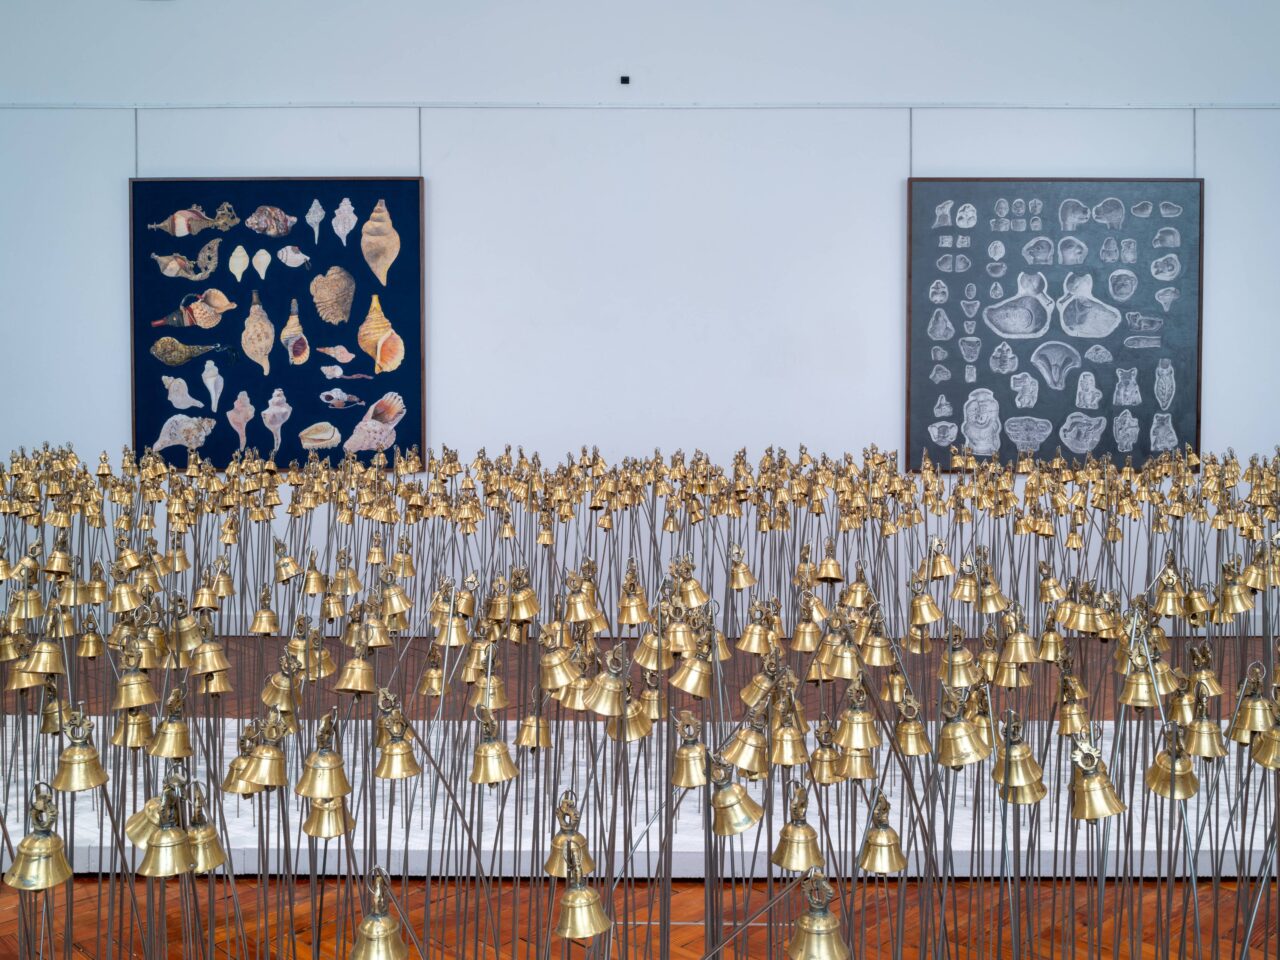 an installation of brass bells and steel rods. In the background is two large framed drawings on a white wall, they have various drawings of shells and objects⁠